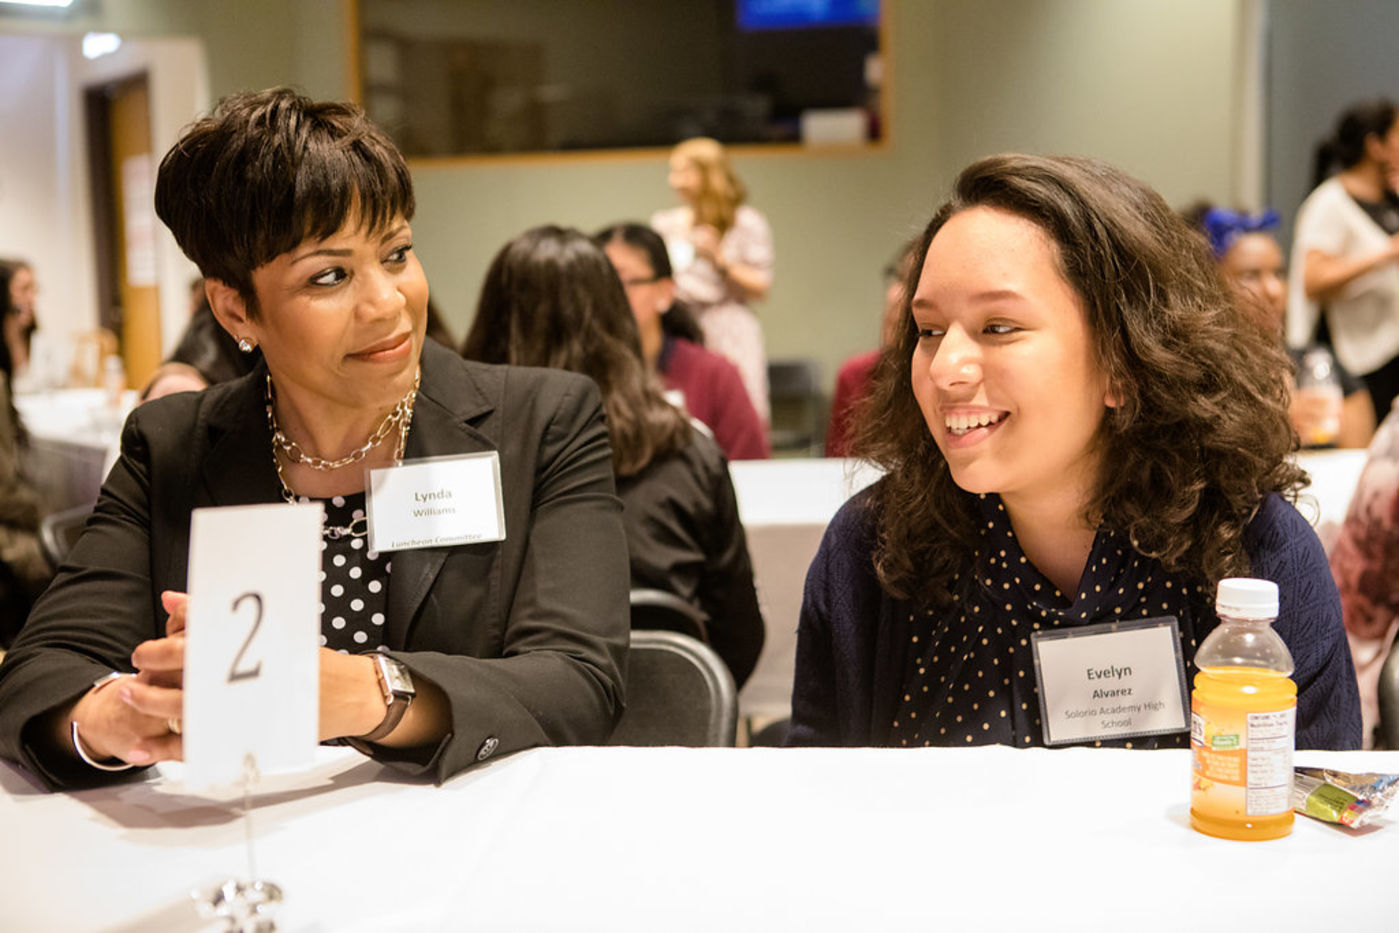 A Women’s Board member sits with a female high school student at an event.